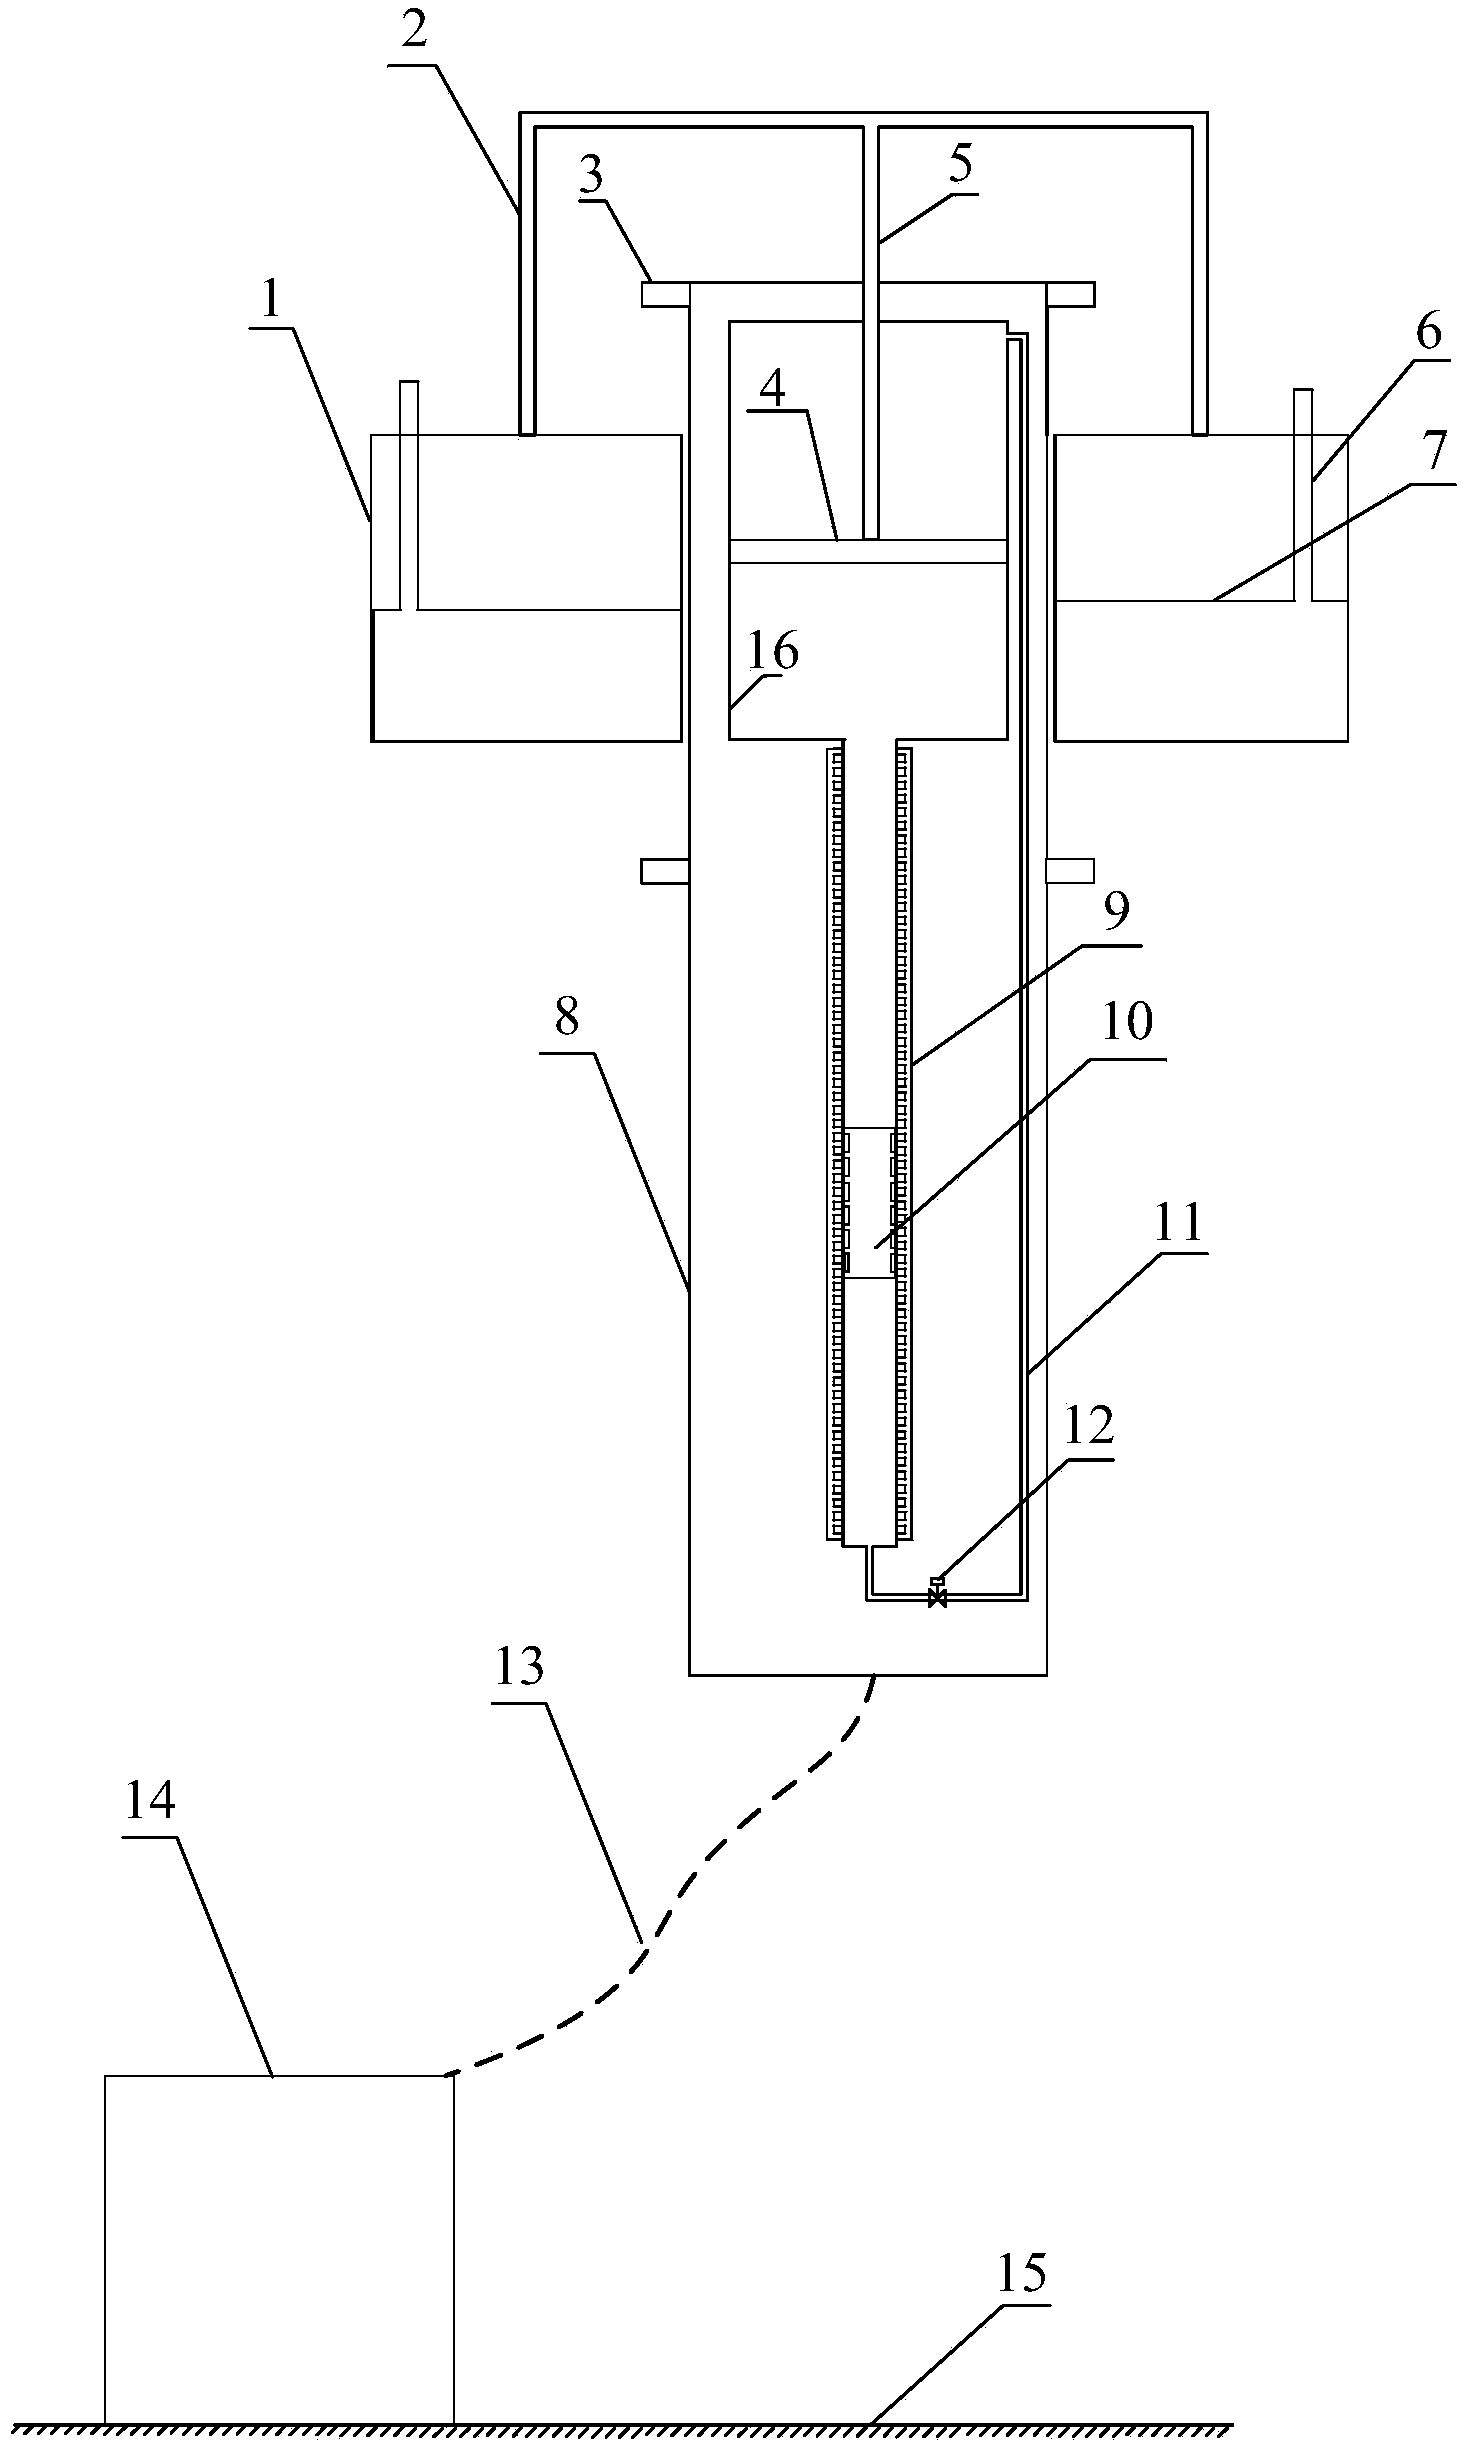 Direct-driven wave power generation device